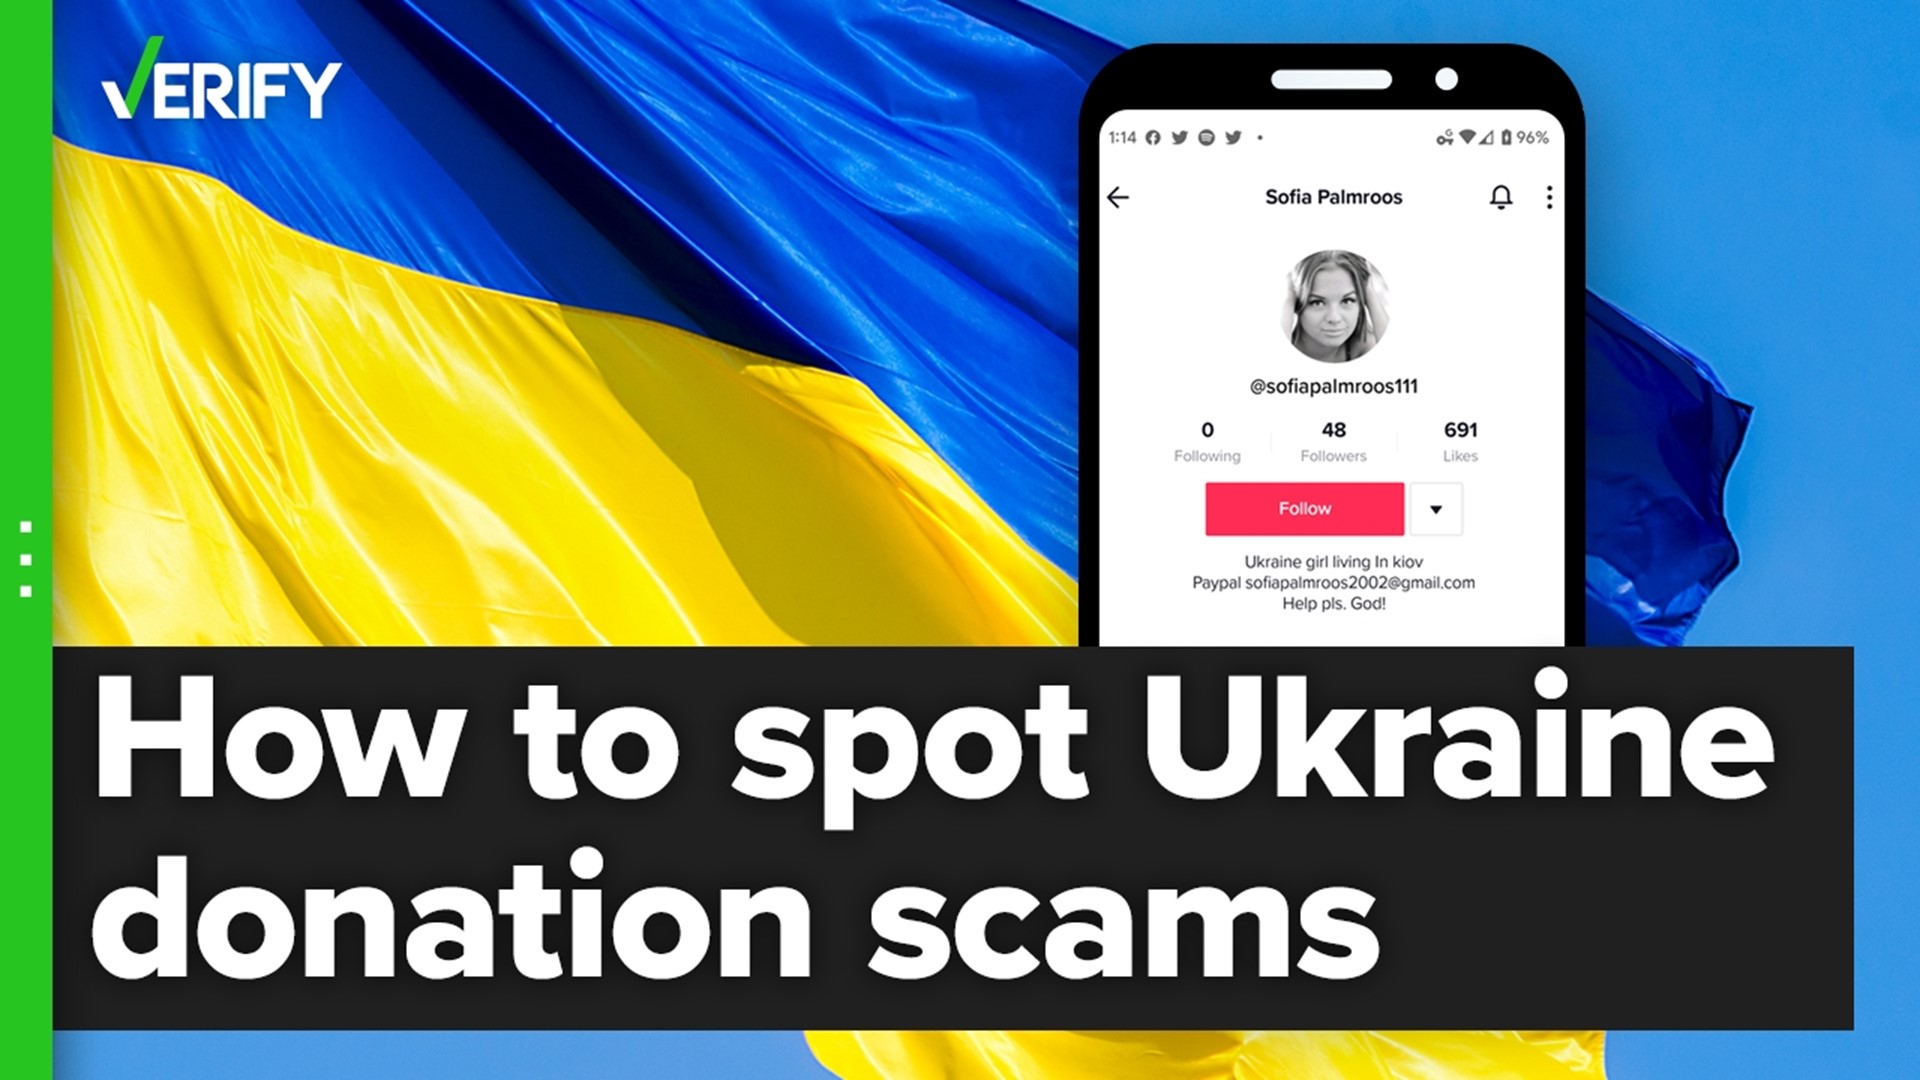 Following Russia’s invasion of Ukraine, many self-proclaimed Ukrainians have asked for donations on social media. We verify how to know which ones are untrustworthy.